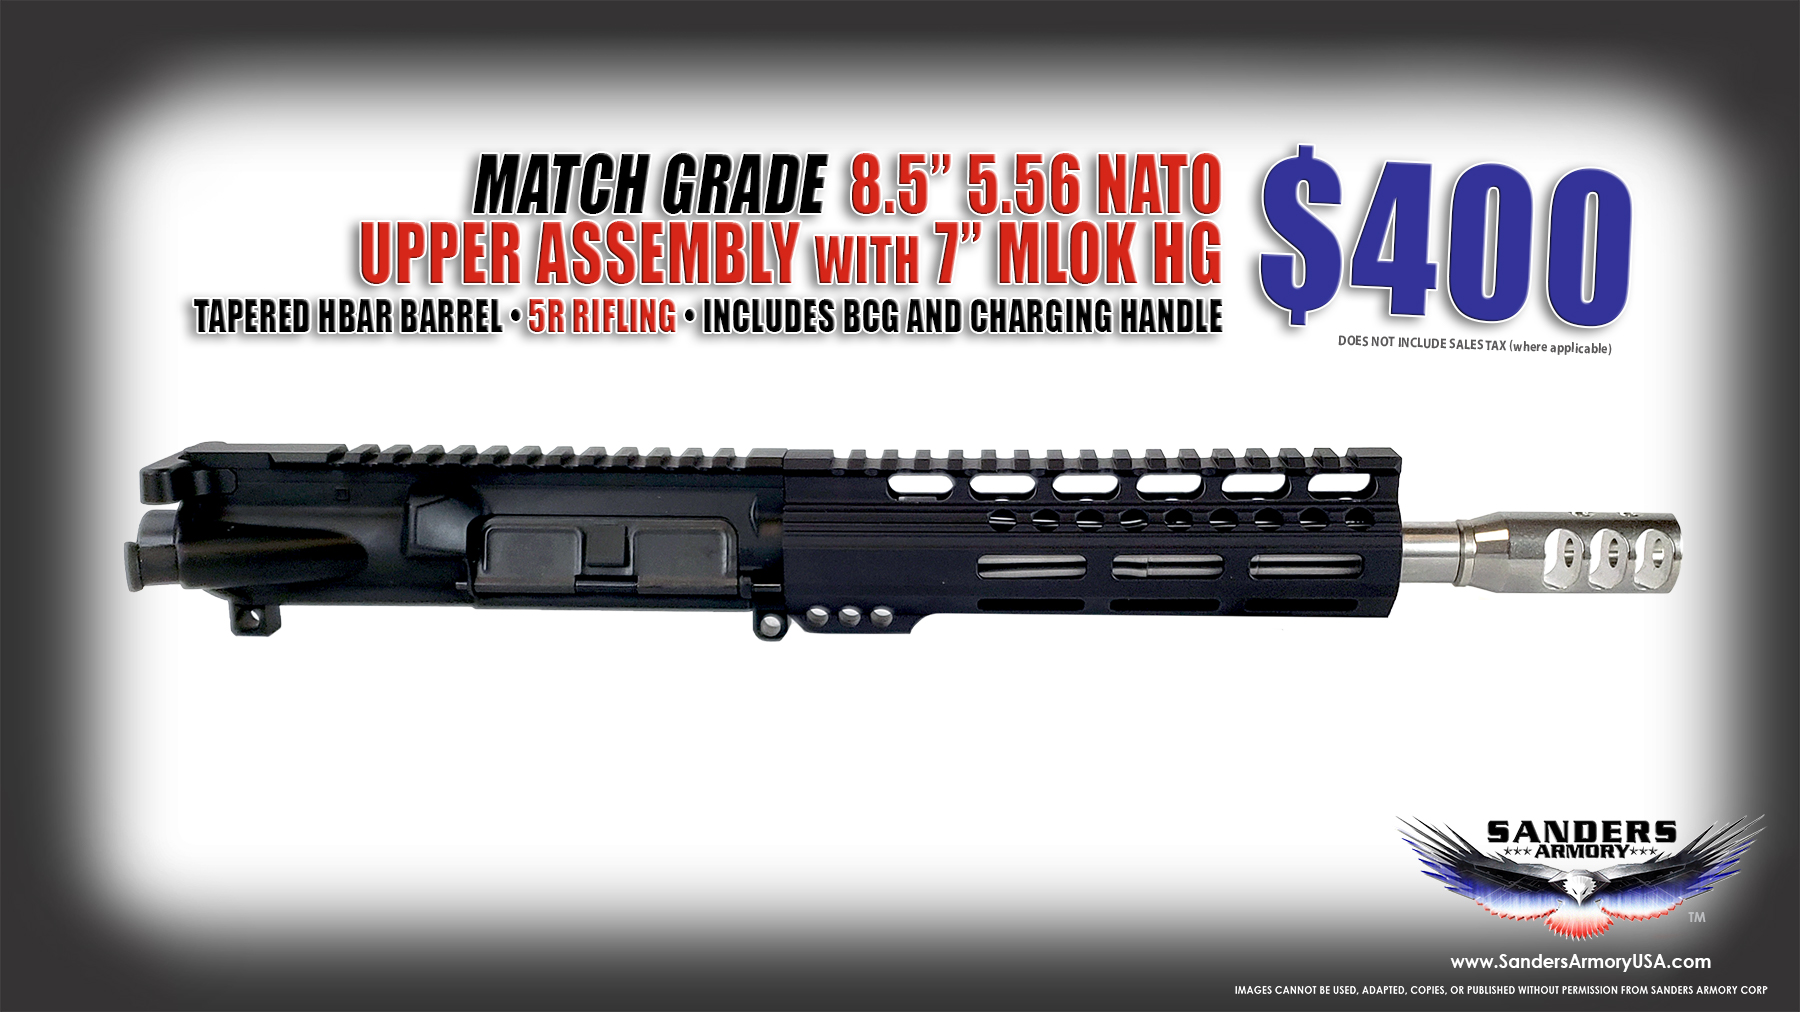 Sanders Armory 85 556 NATO Match Grade Stainless Steel Upper Assembly